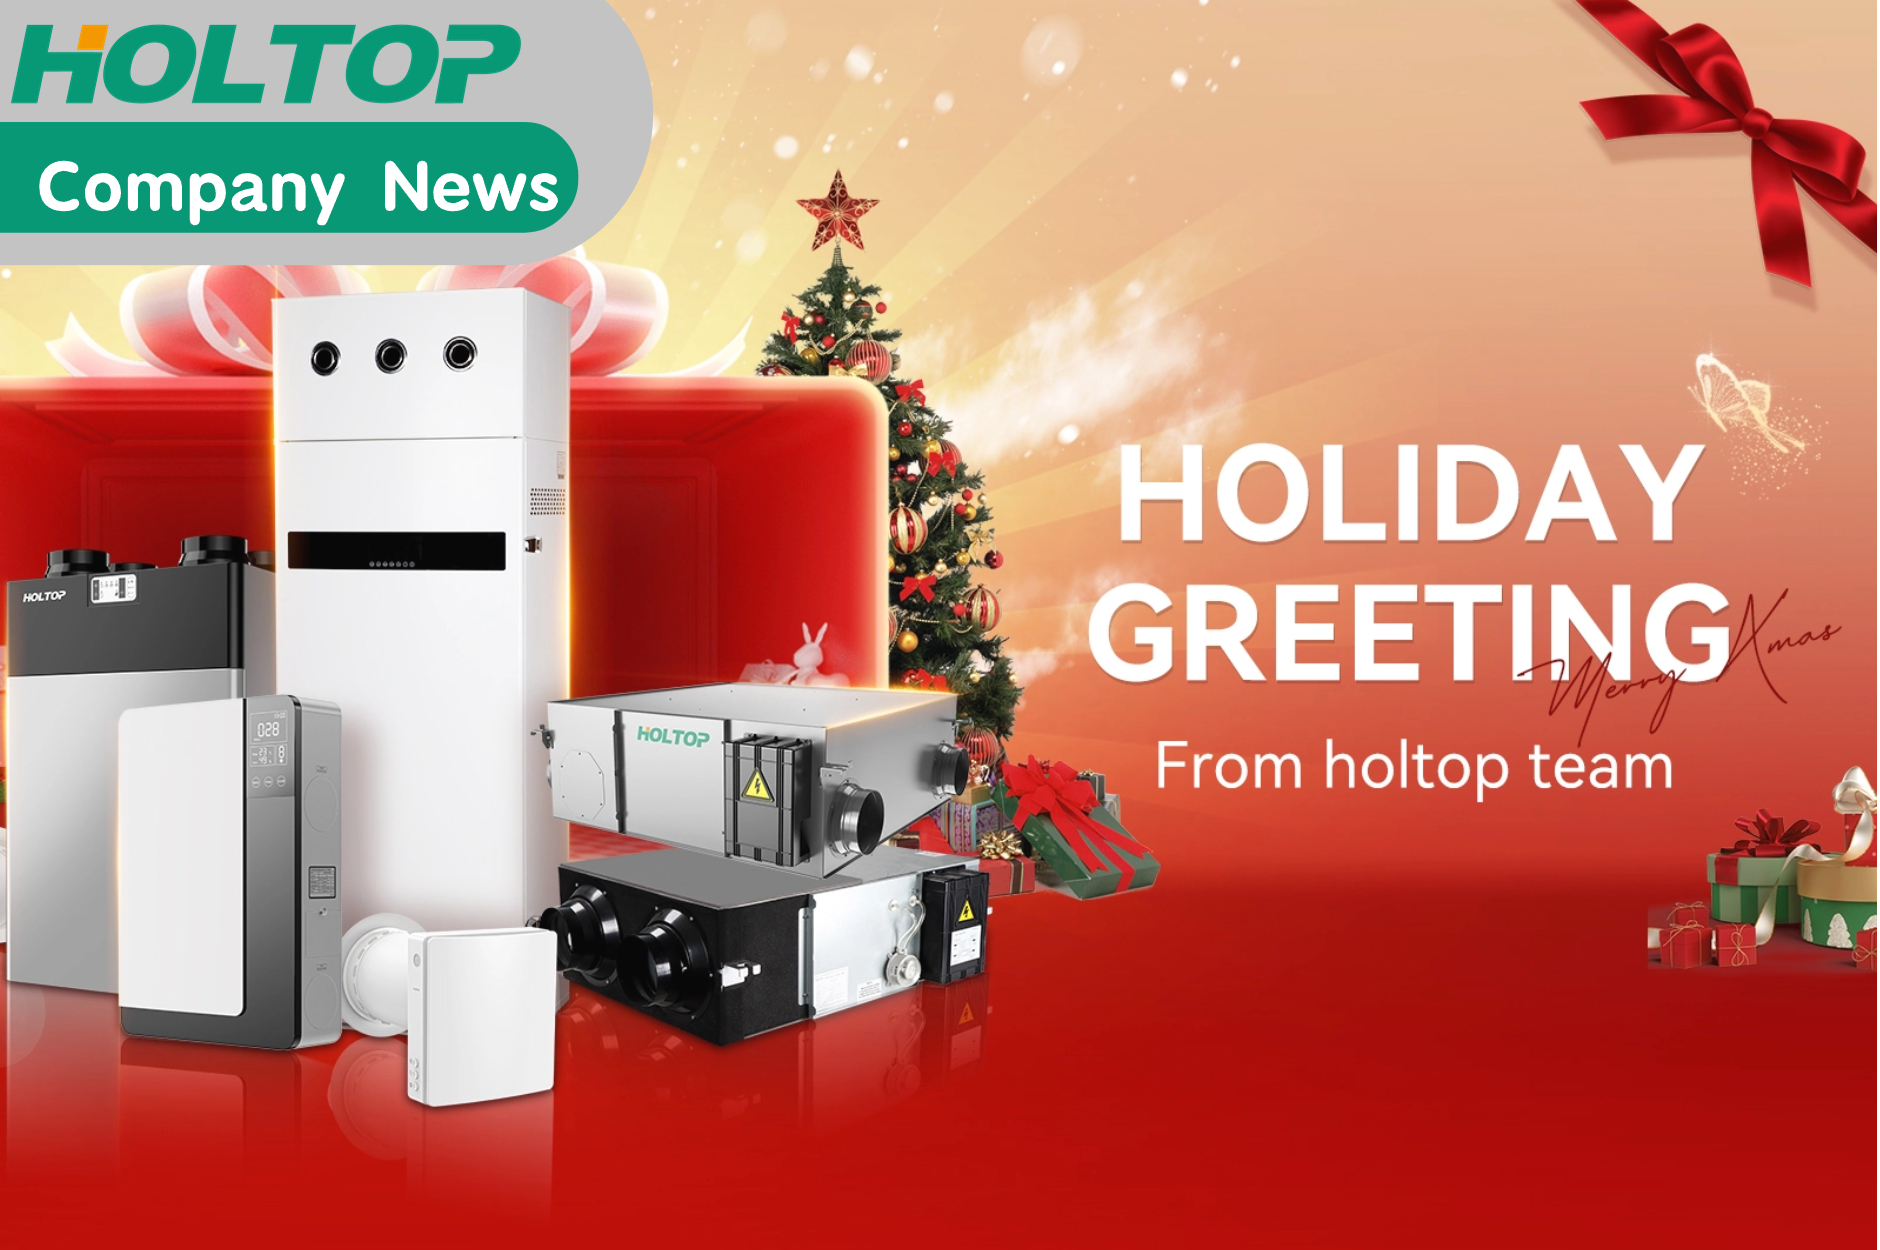 HOLTOP Company wishes you a Merry Christmas and a Happy New Year!